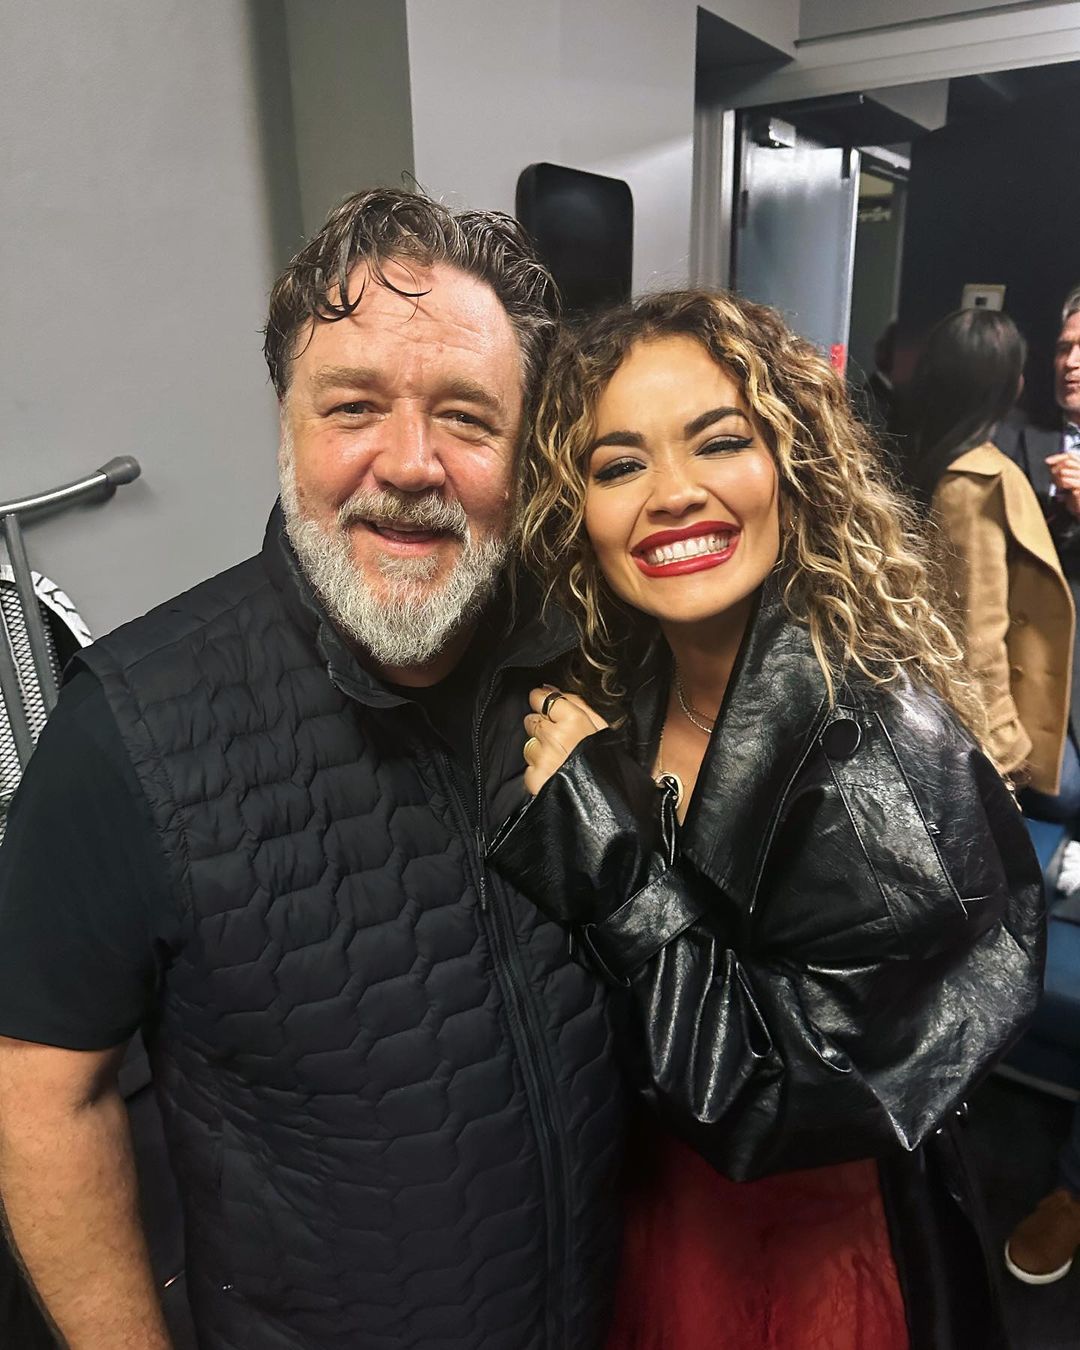 Russell Crowe Brings Rita Ora Out! - Photo 2